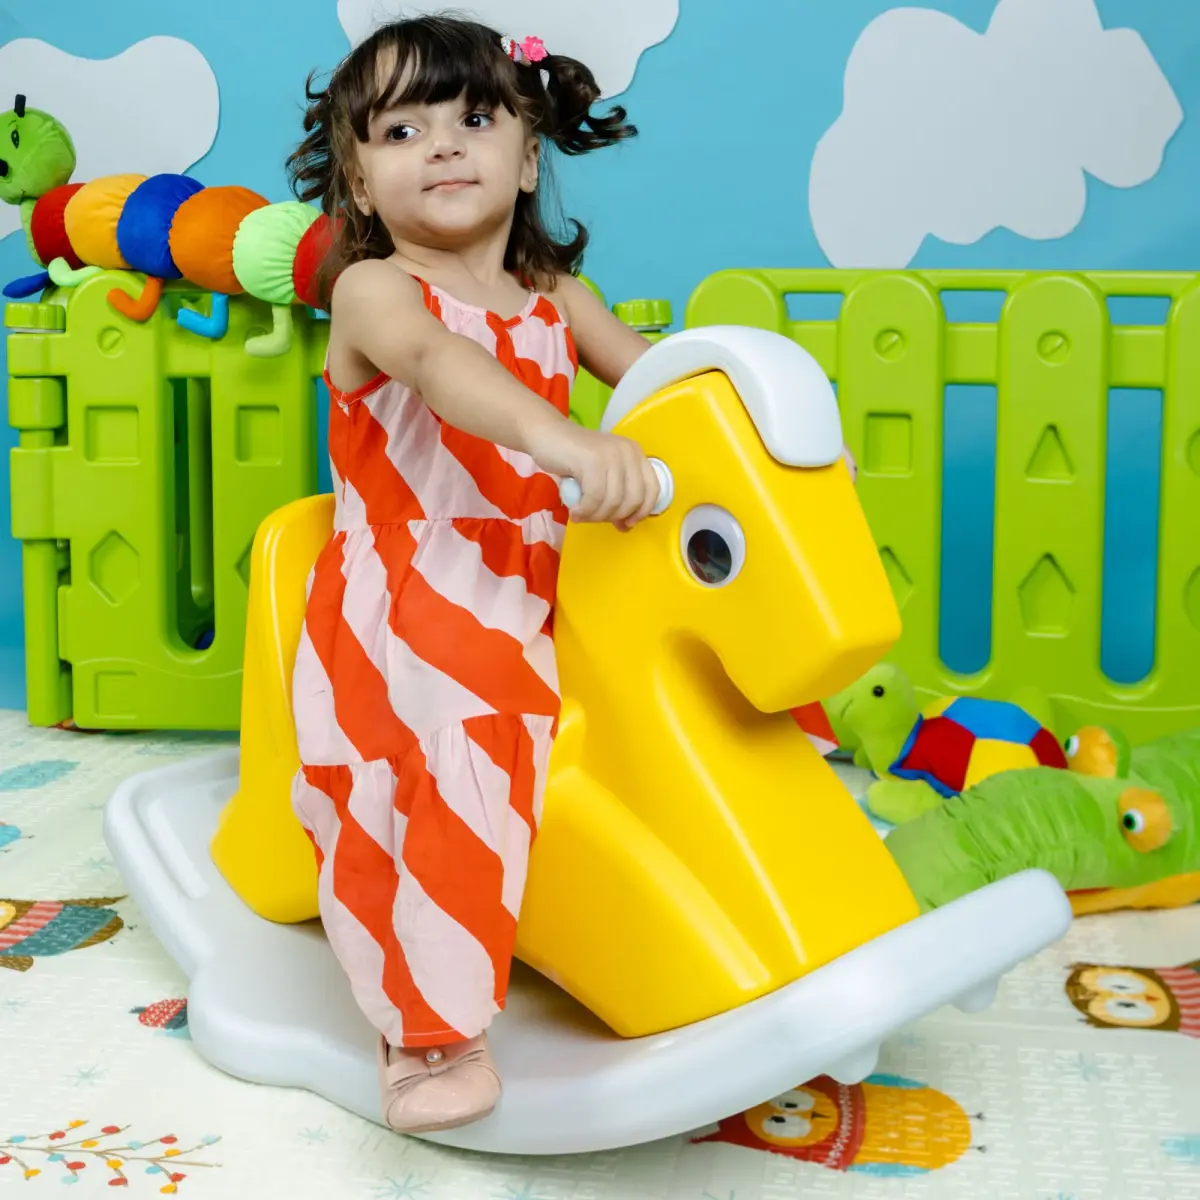 Zoozi  2 in 1 Ride On Rocking Horse for Toddlers and Babies, Comes with Wheels, Yellow, 12M+